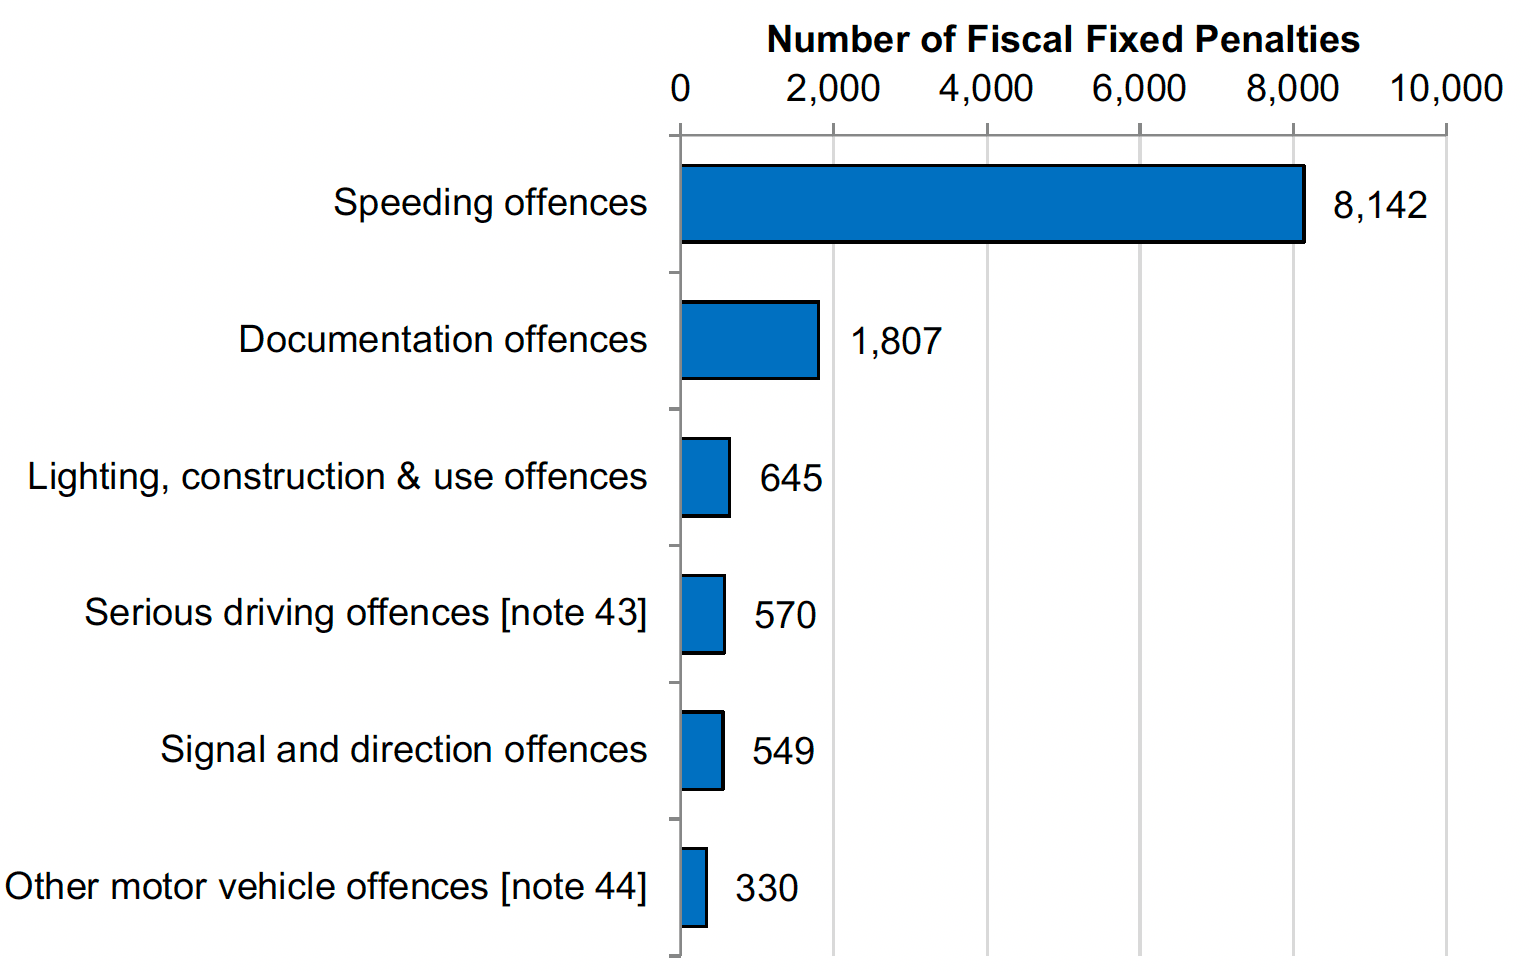 Bar chart showing the most common offences given a Fiscal Fixed Penalty issued by COPFS, the most being for Speeding offences (8,142) followed by Documentation offences (1,807).